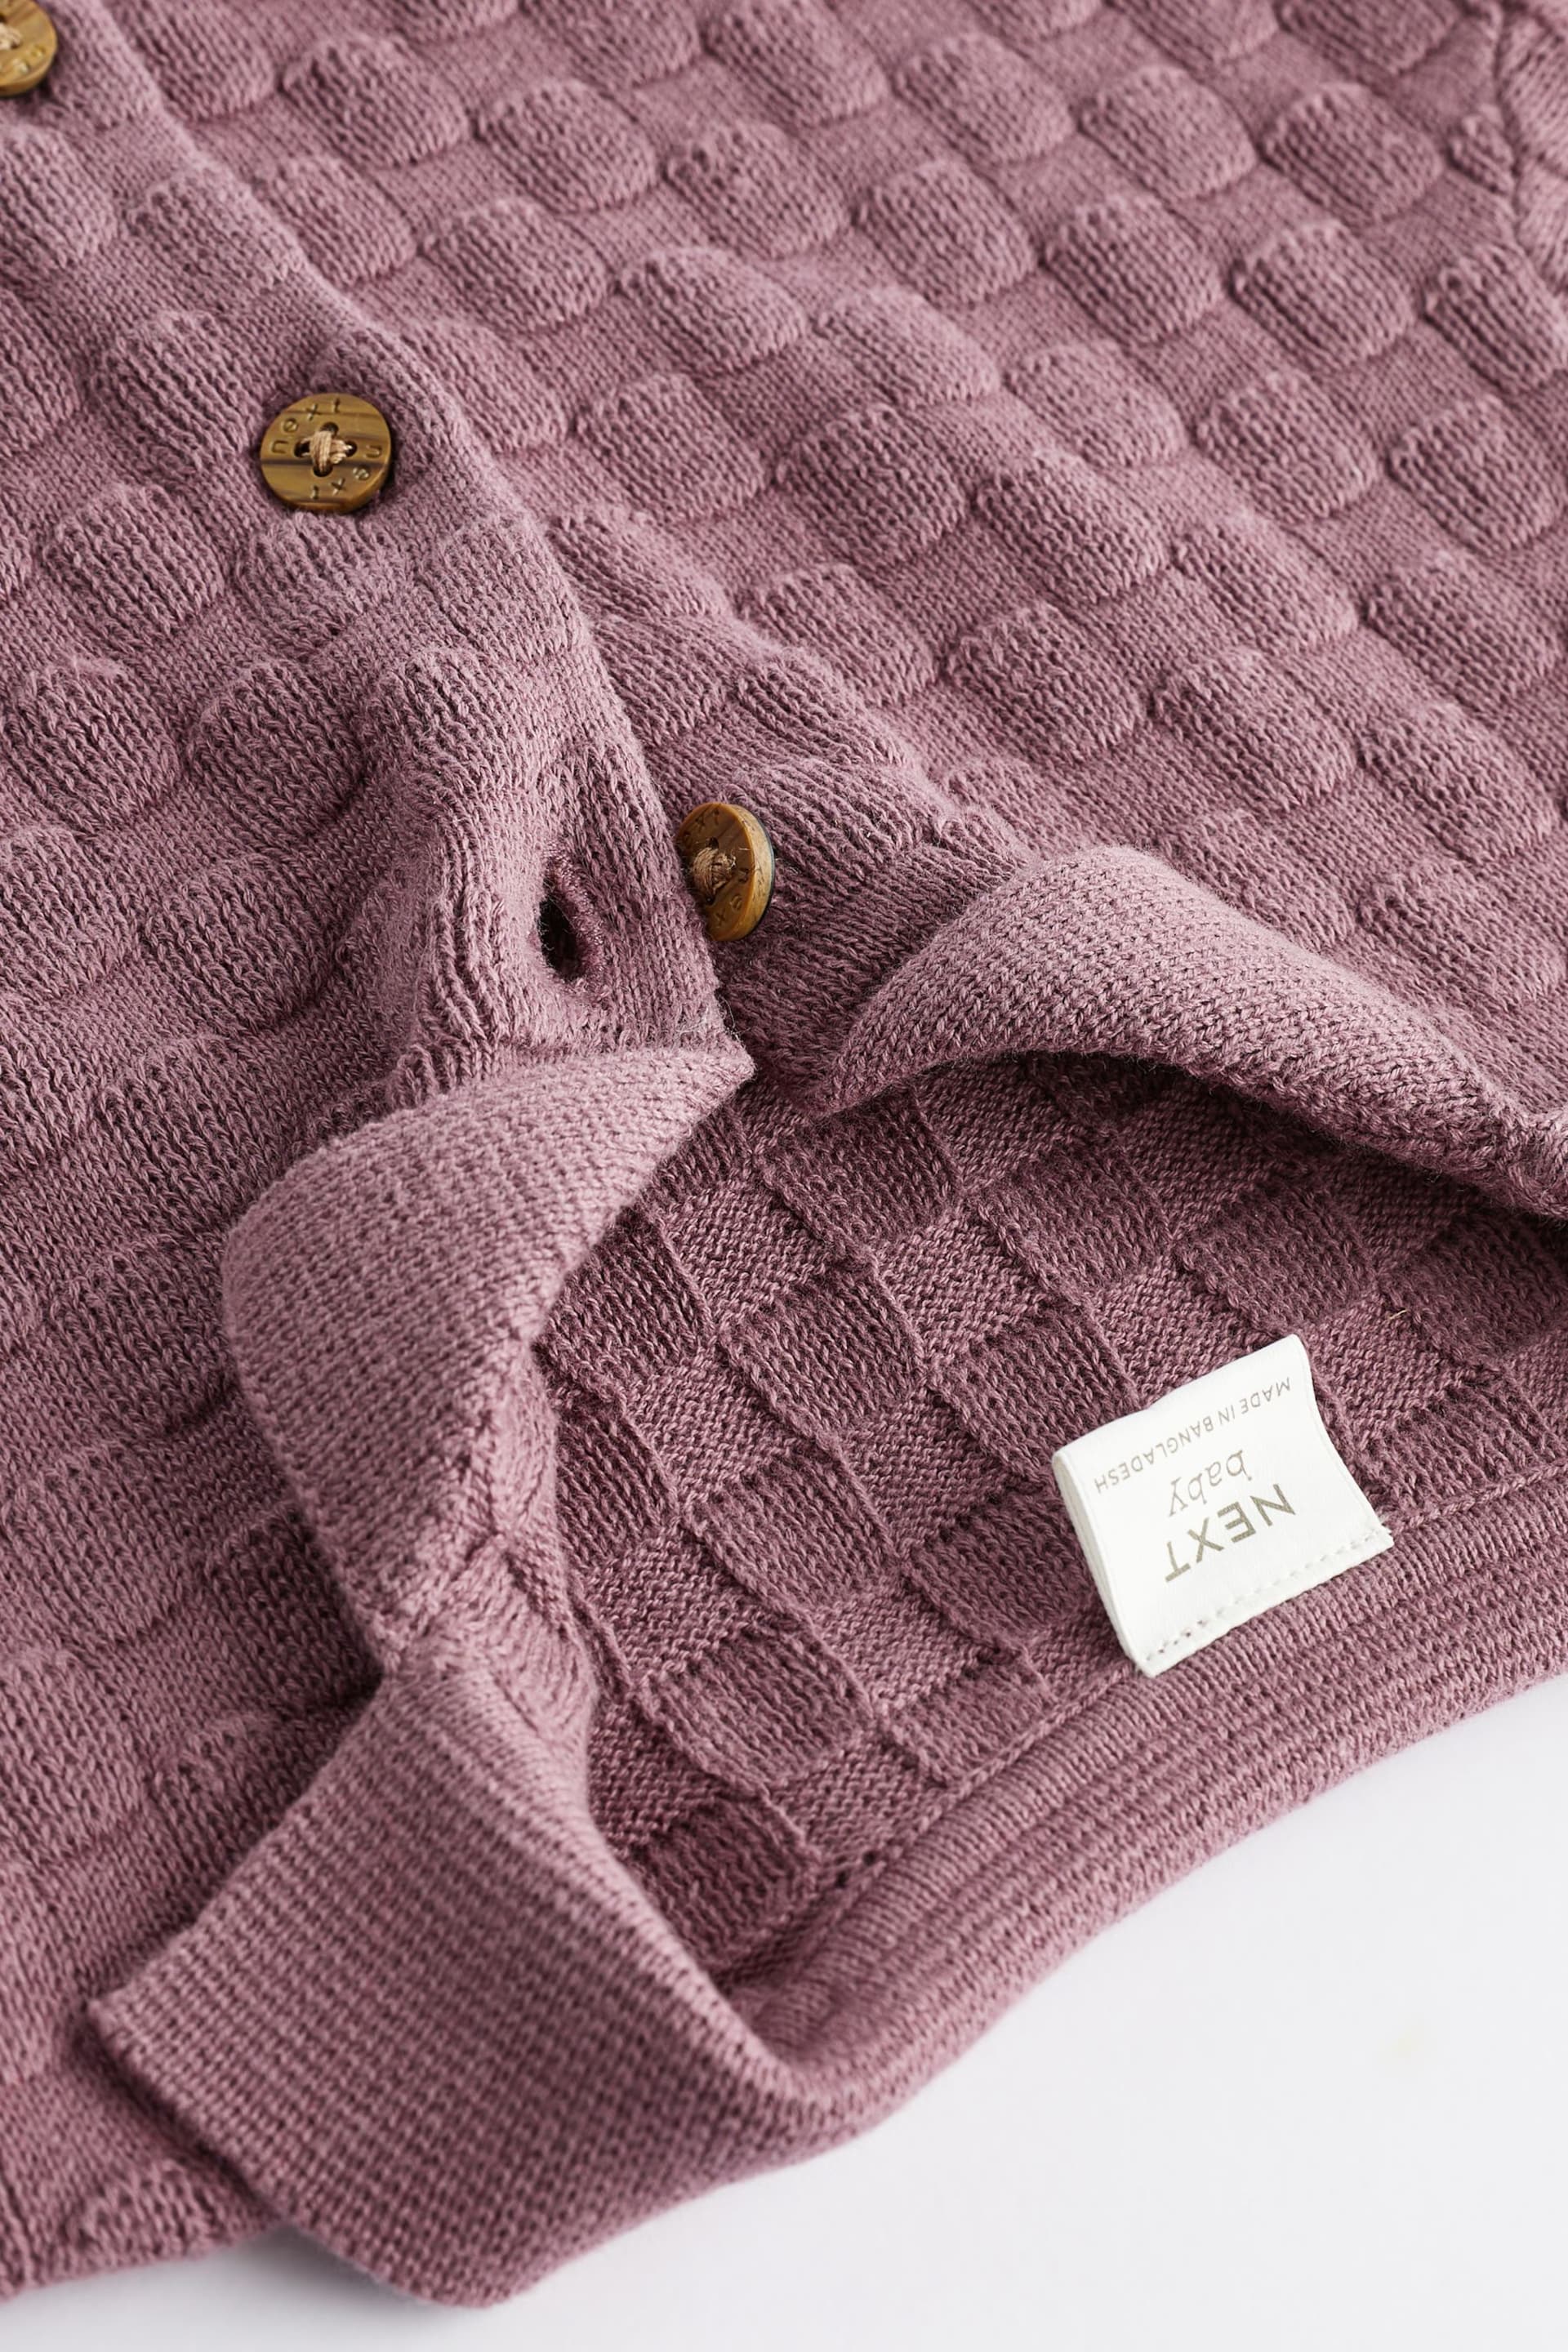 Mauve Purple Baby Knitted Romper (0mths-2yrs) - Image 5 of 6